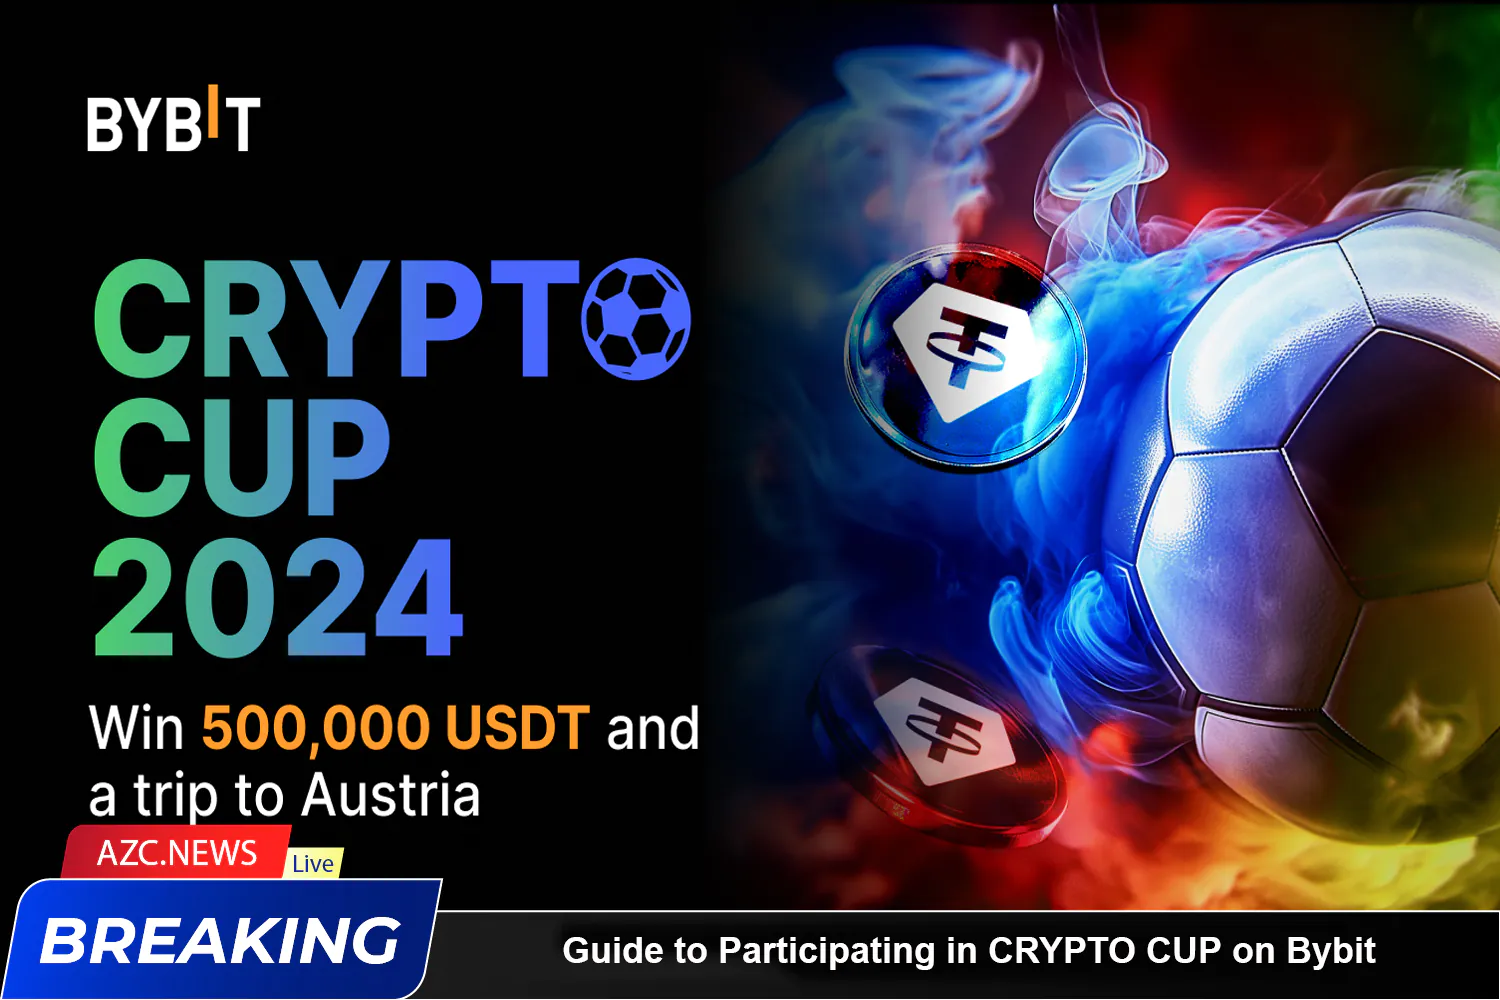 Guide To Participating In Crypto Cup On Bybit